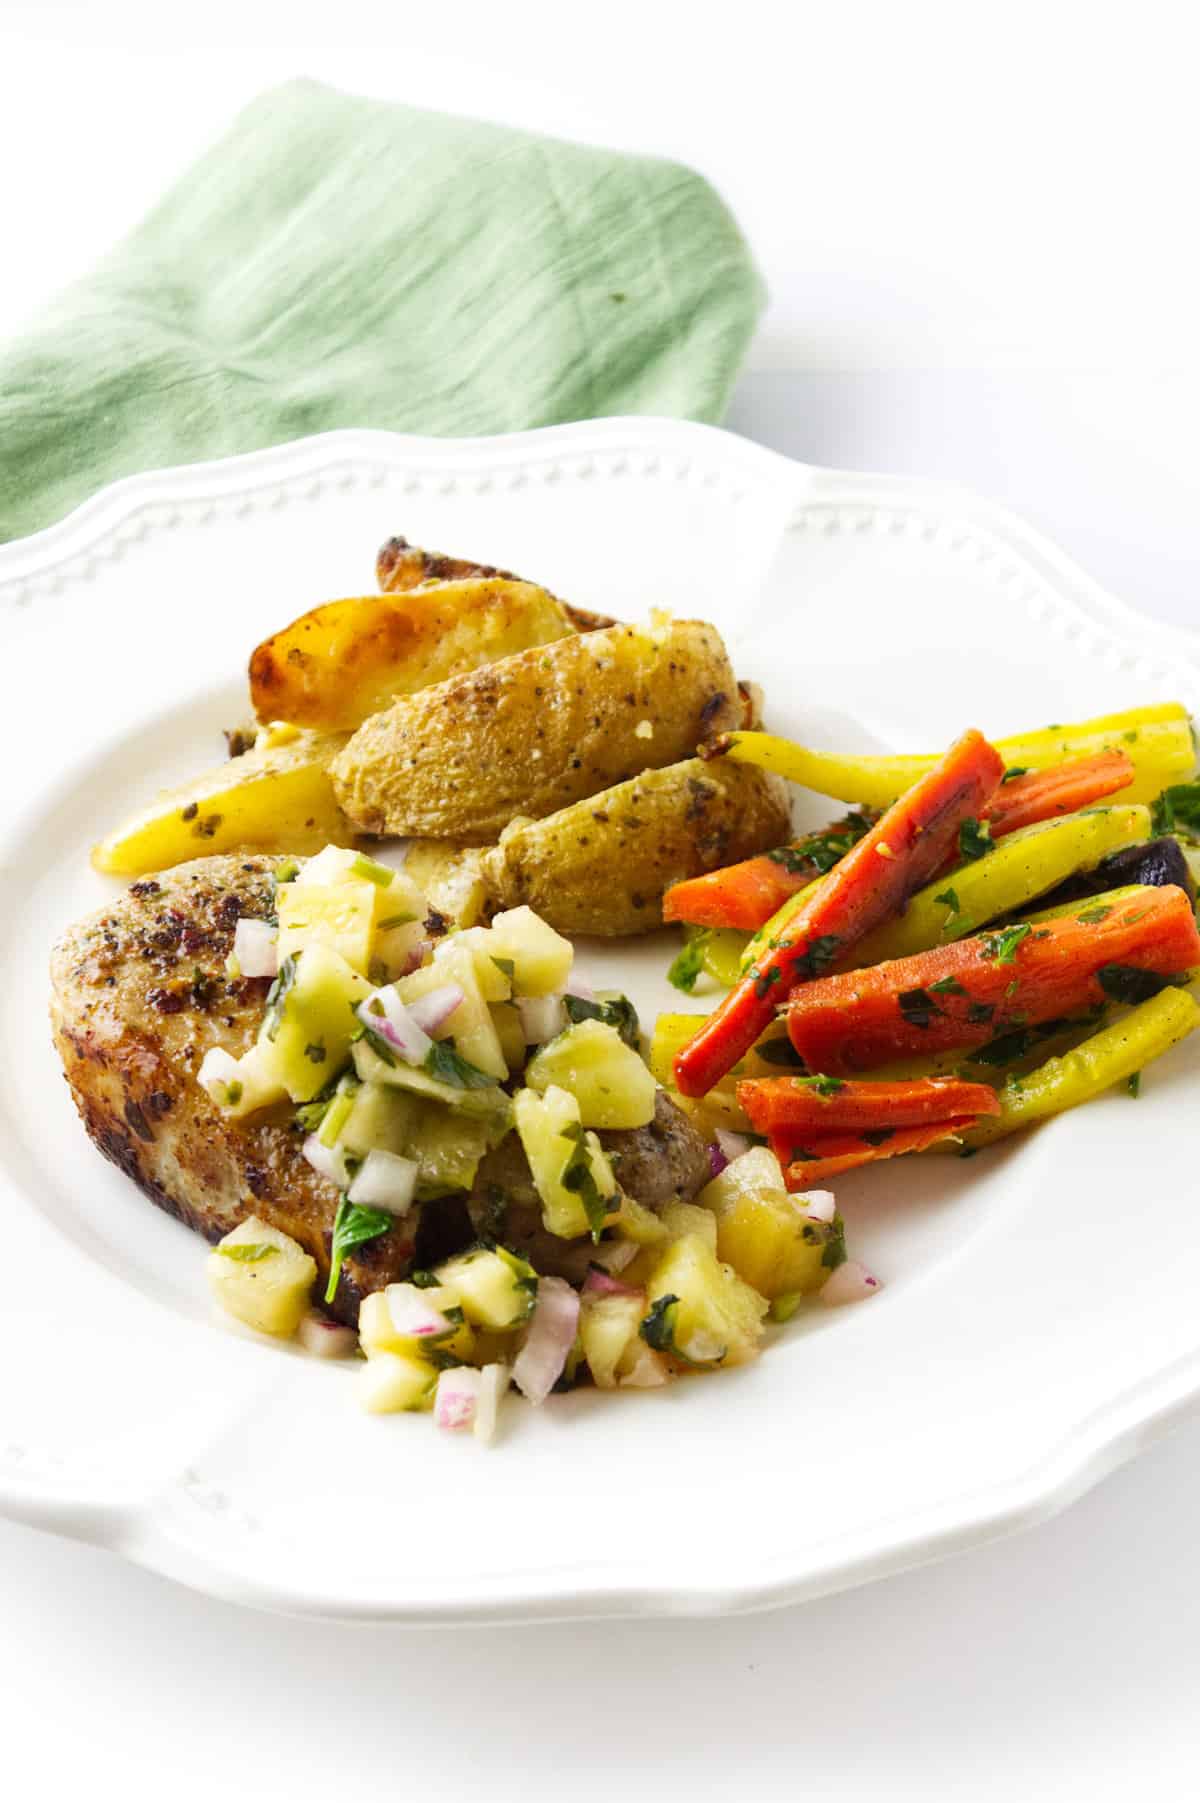 plate with grilled porkchop, pineapple salsa, roasted carrots, roasted potatoes.